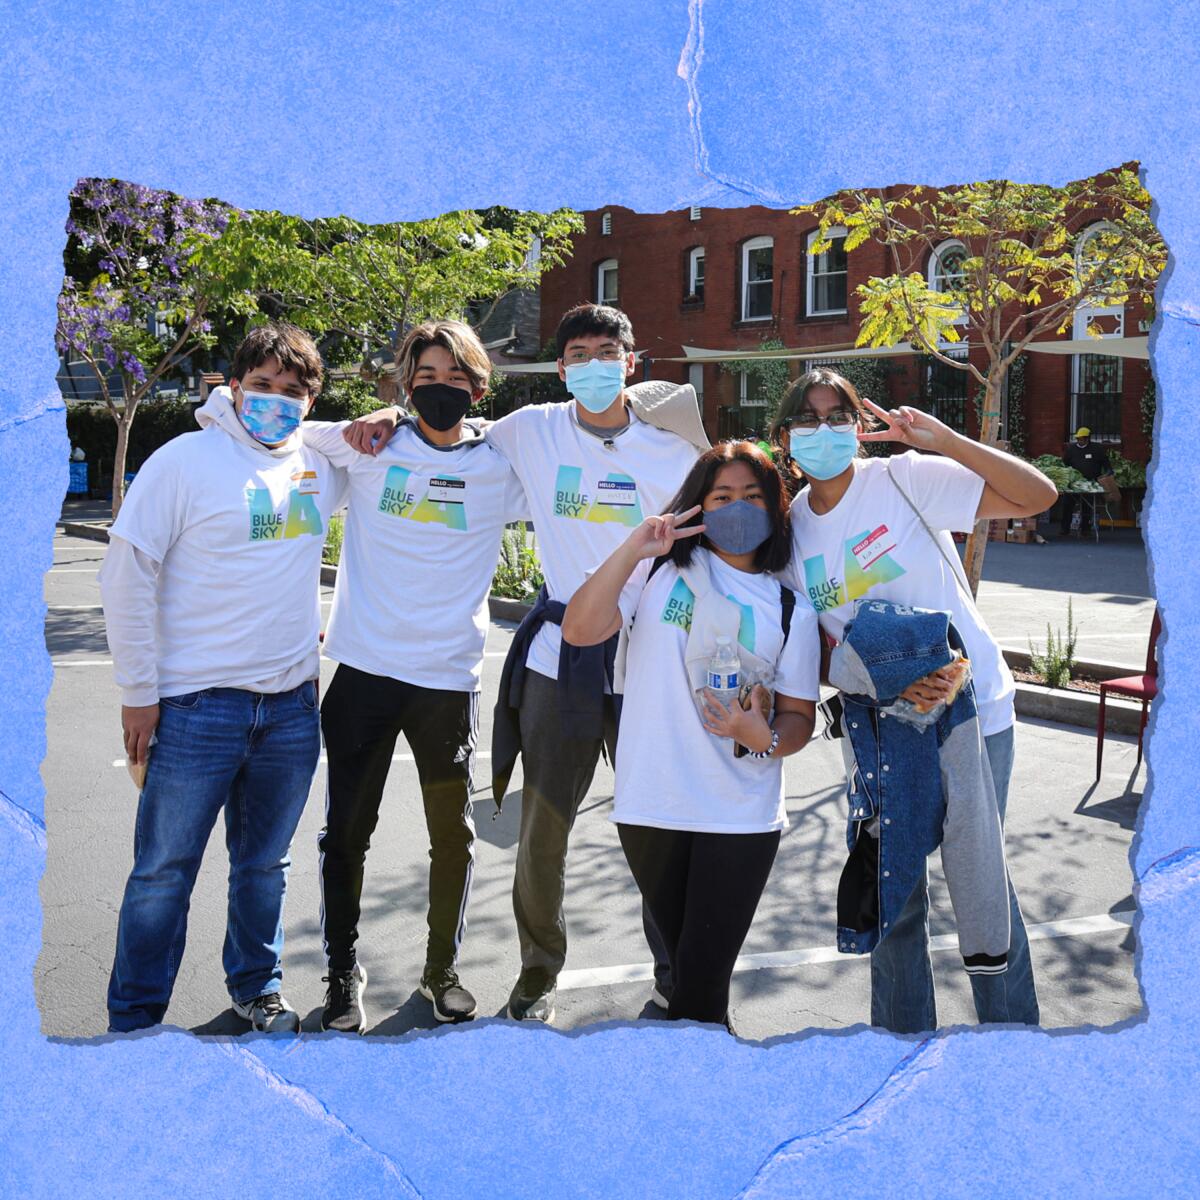 Five young people in matching T-shirts and masks stand casually and smile for the camera.